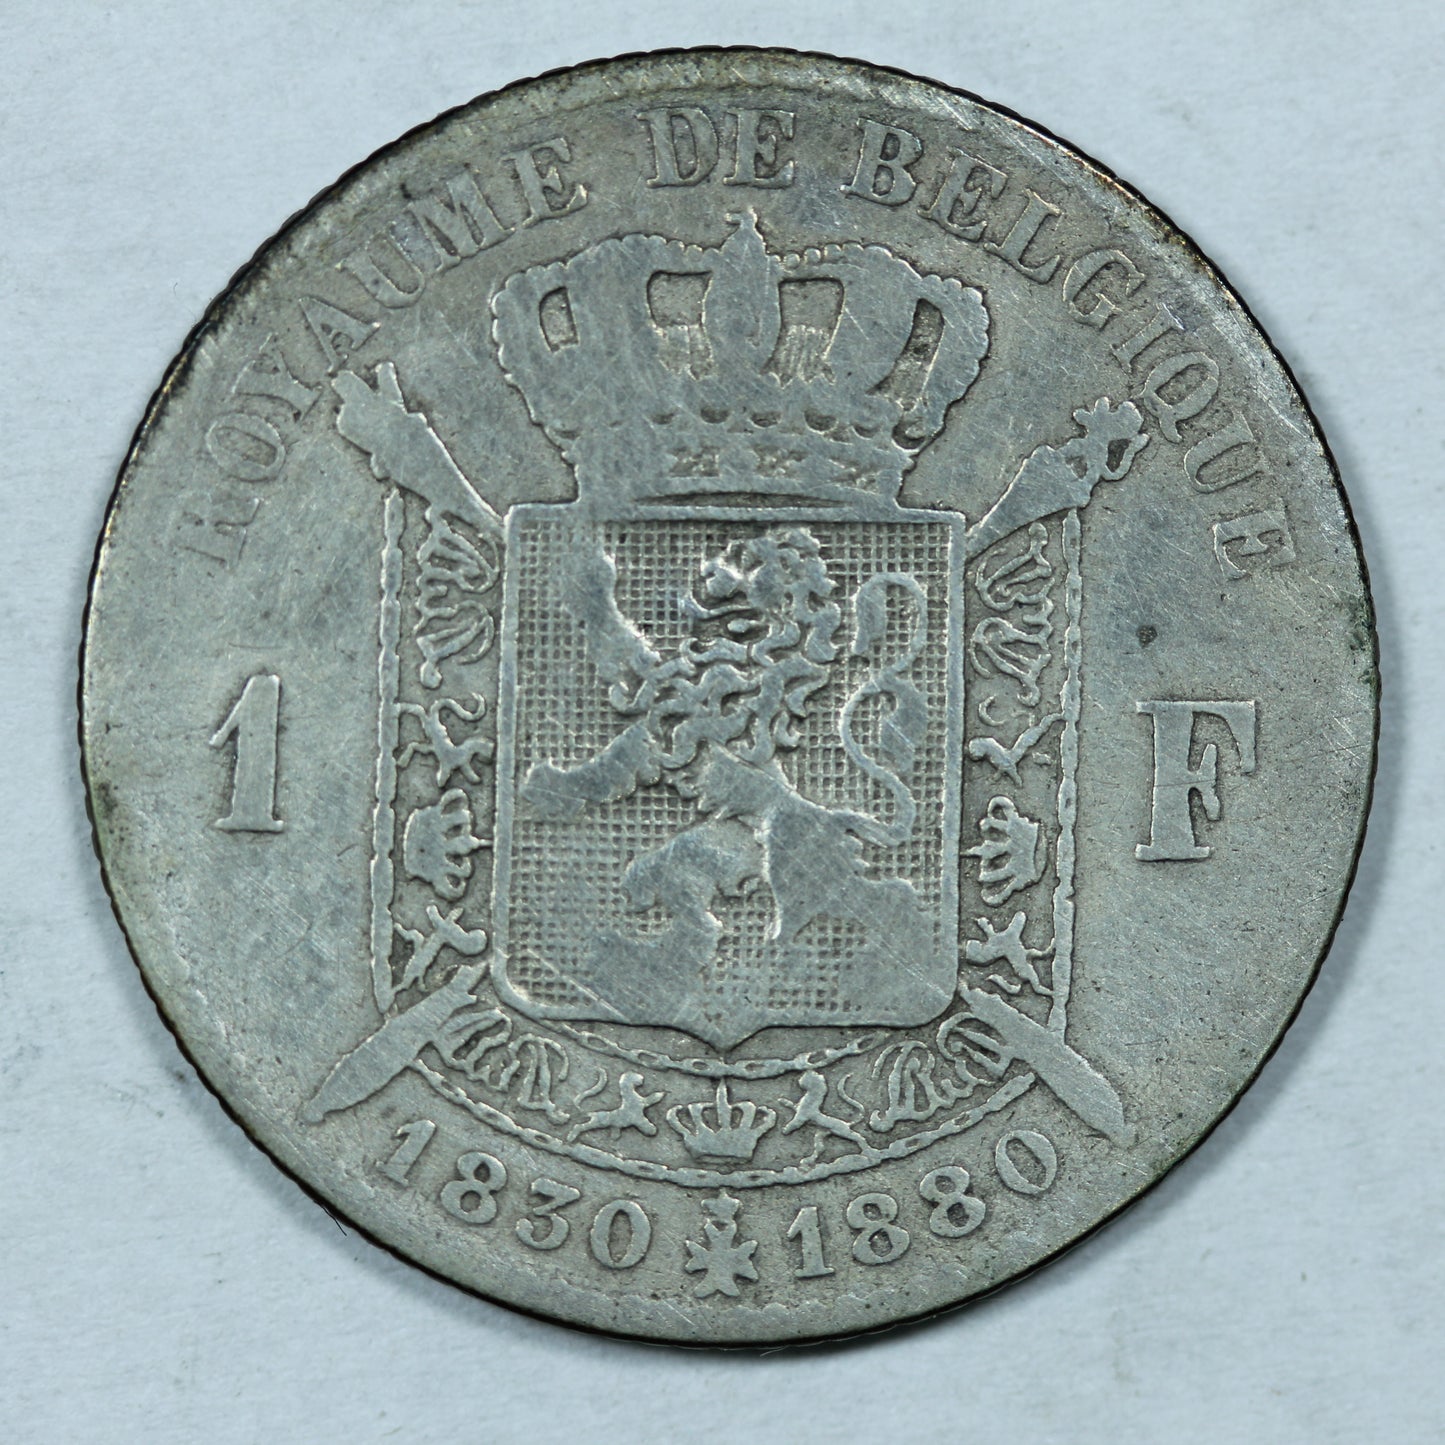 1880 Belgium 1 Franc Silver Coin Anniversary of Independence KM#38